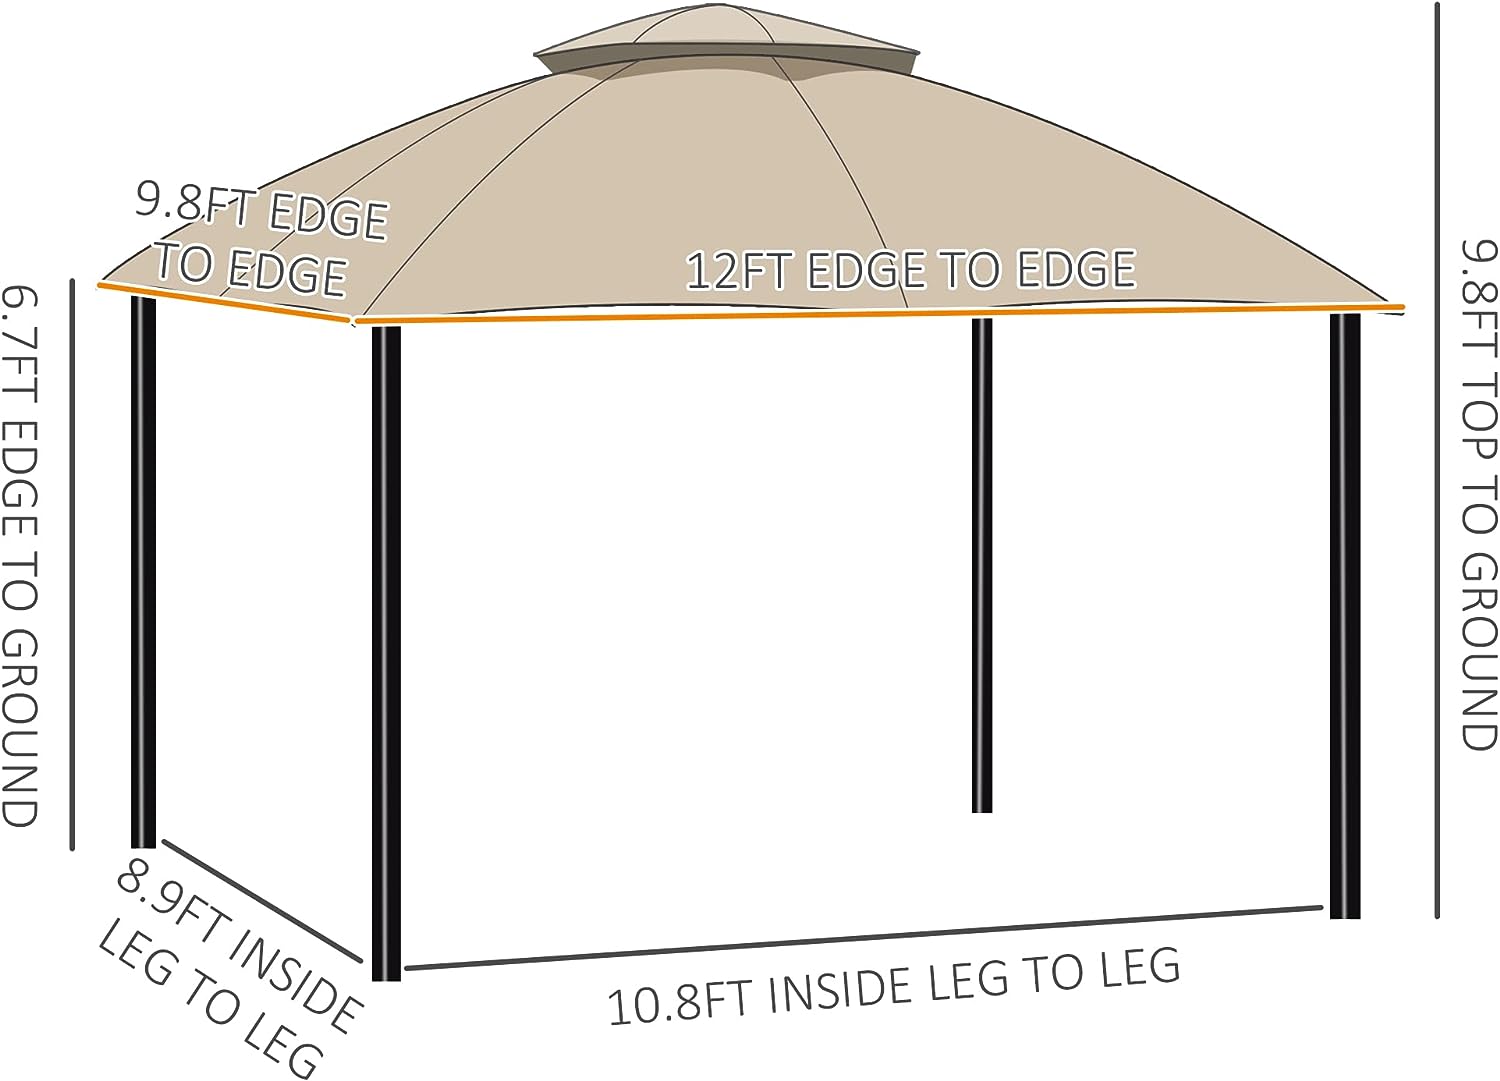 Outsunny 10' x 12' Outdoor Gazebo, Canopy Shelter w/Double Vented Roof - $290